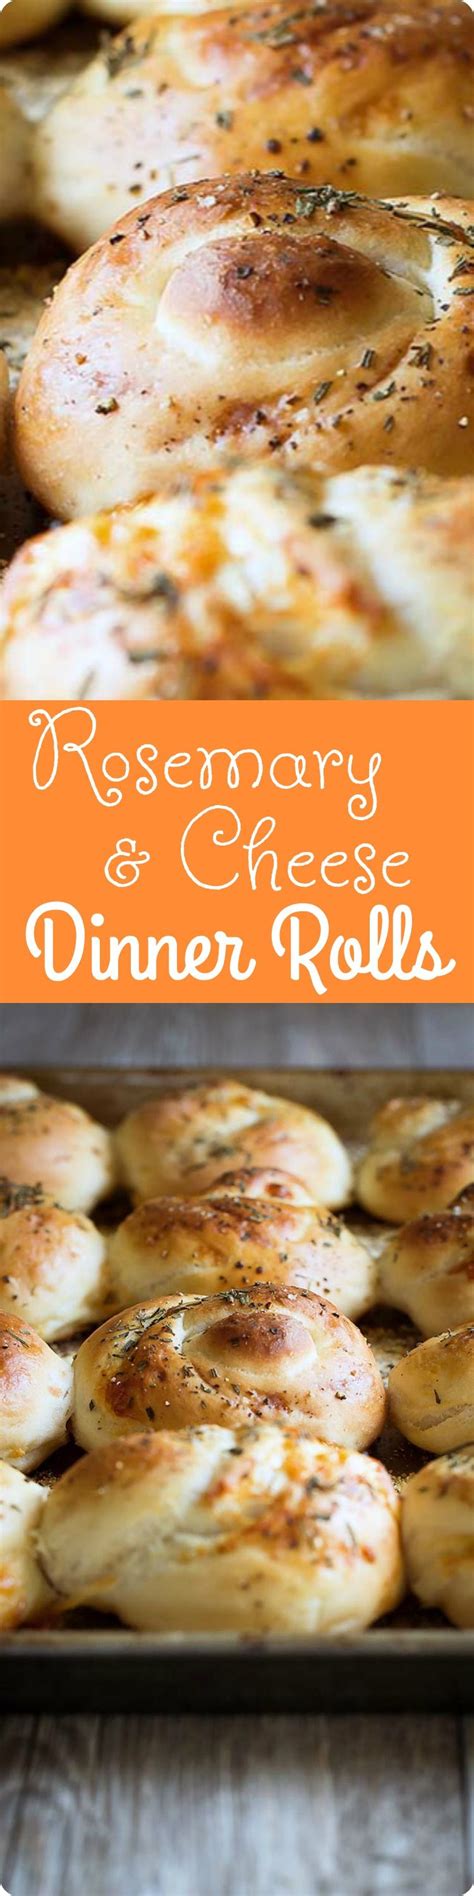 rosemary and cheese dinner rolls red star® yeast recipe dinner rolls yeast bread sweet